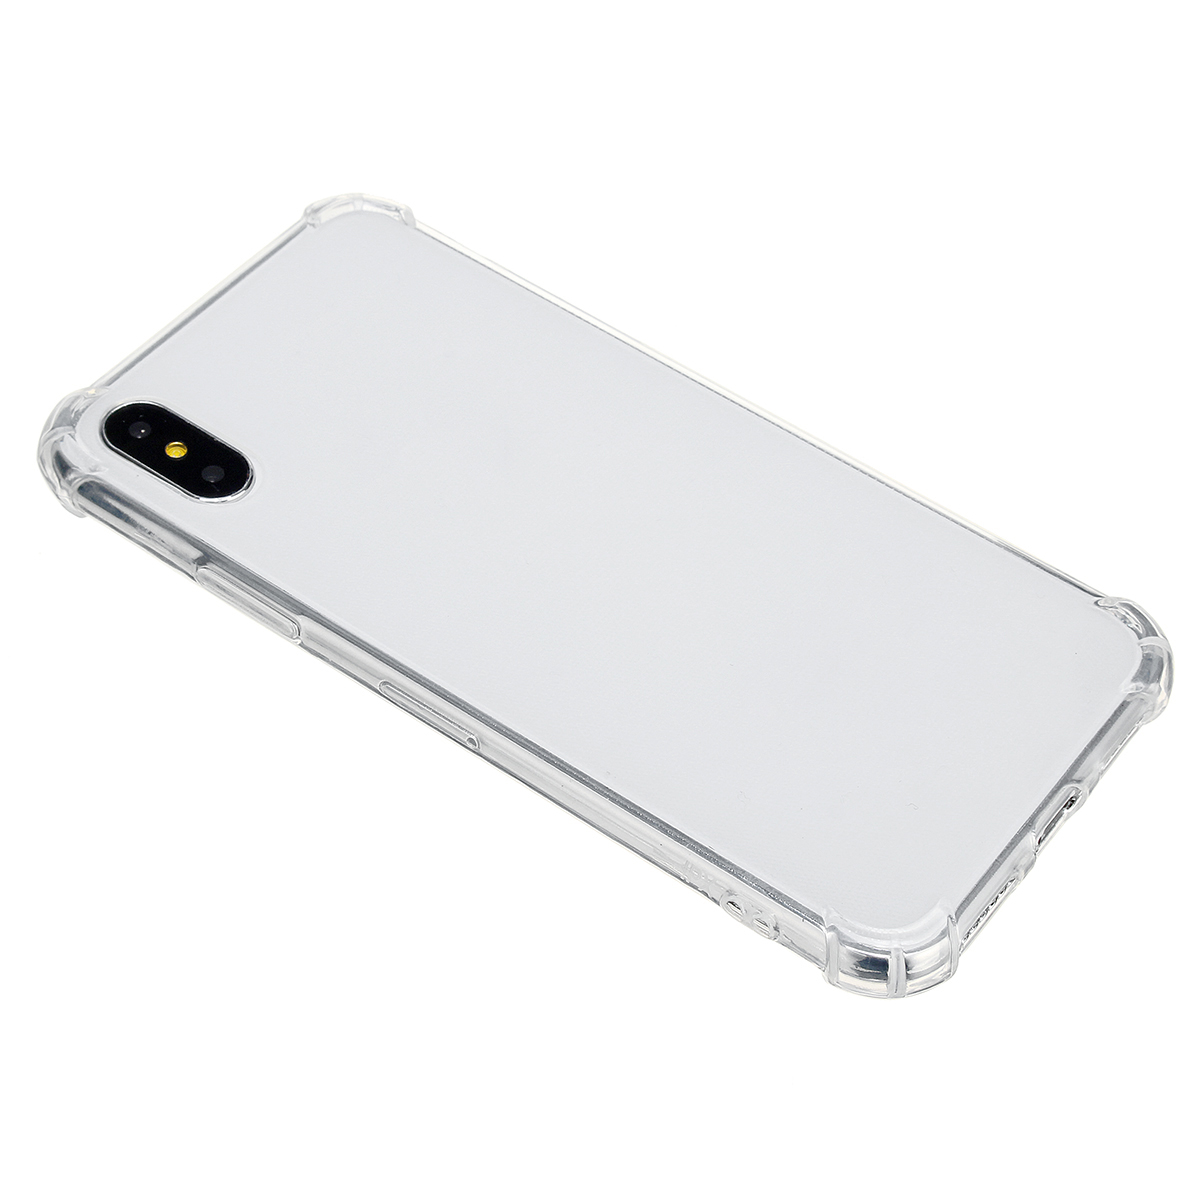 Bakeey-Airbag-Transparent-Clear-Shockproof-Protective-Cover-Case-for-iPhone-X--XS--XR--iP-XS-Max-1633378-2